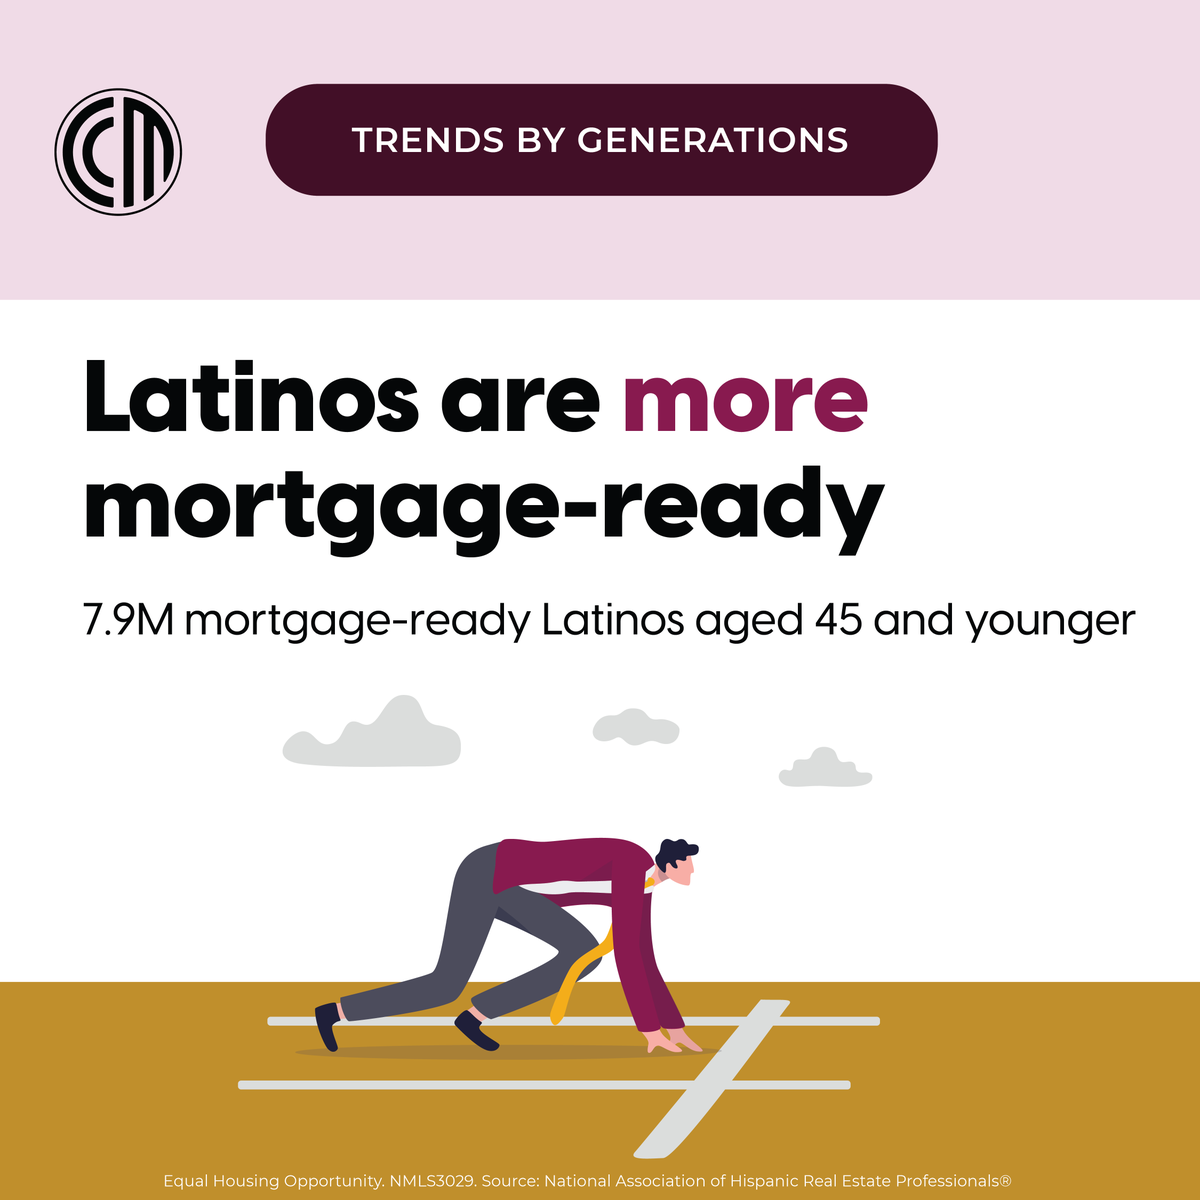 According to Freddie Mac, 33% of Latinos aged 45 and under have the credit characteristics to qualify for a mortgage. This group also has the largest near mortgage-ready population of any racial or ethnic group. spr.ly/6017PN87V #Mortgage #Homebuying #HomeFinance